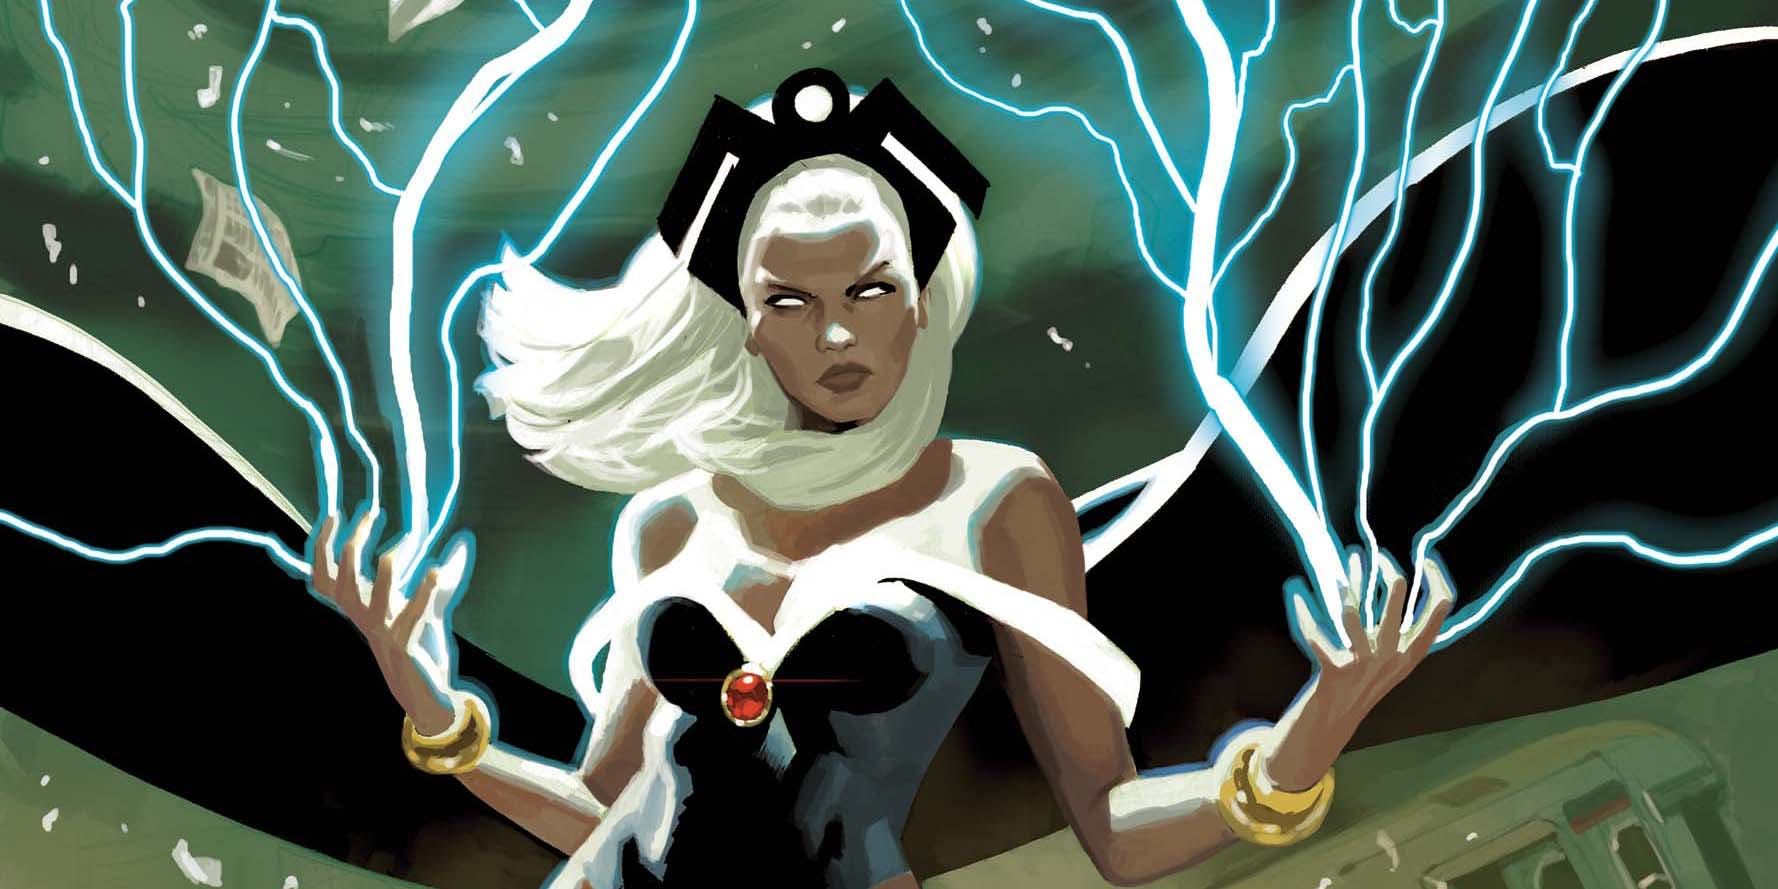 The X-Men's Storm with lightning flowing from her palms